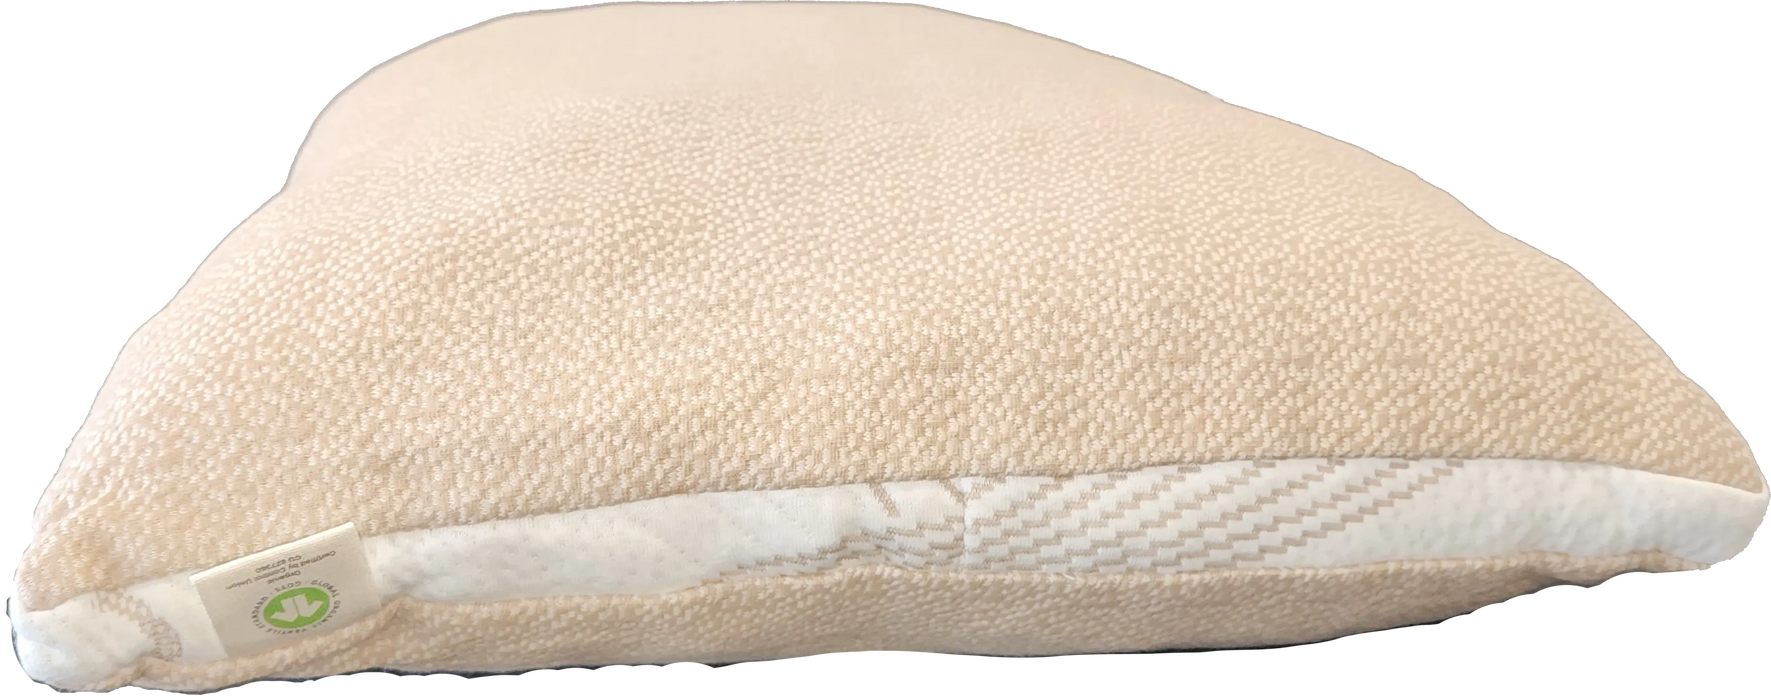 Organic Hybrid Latex and Wool Pillow Sterling Sleep Systems